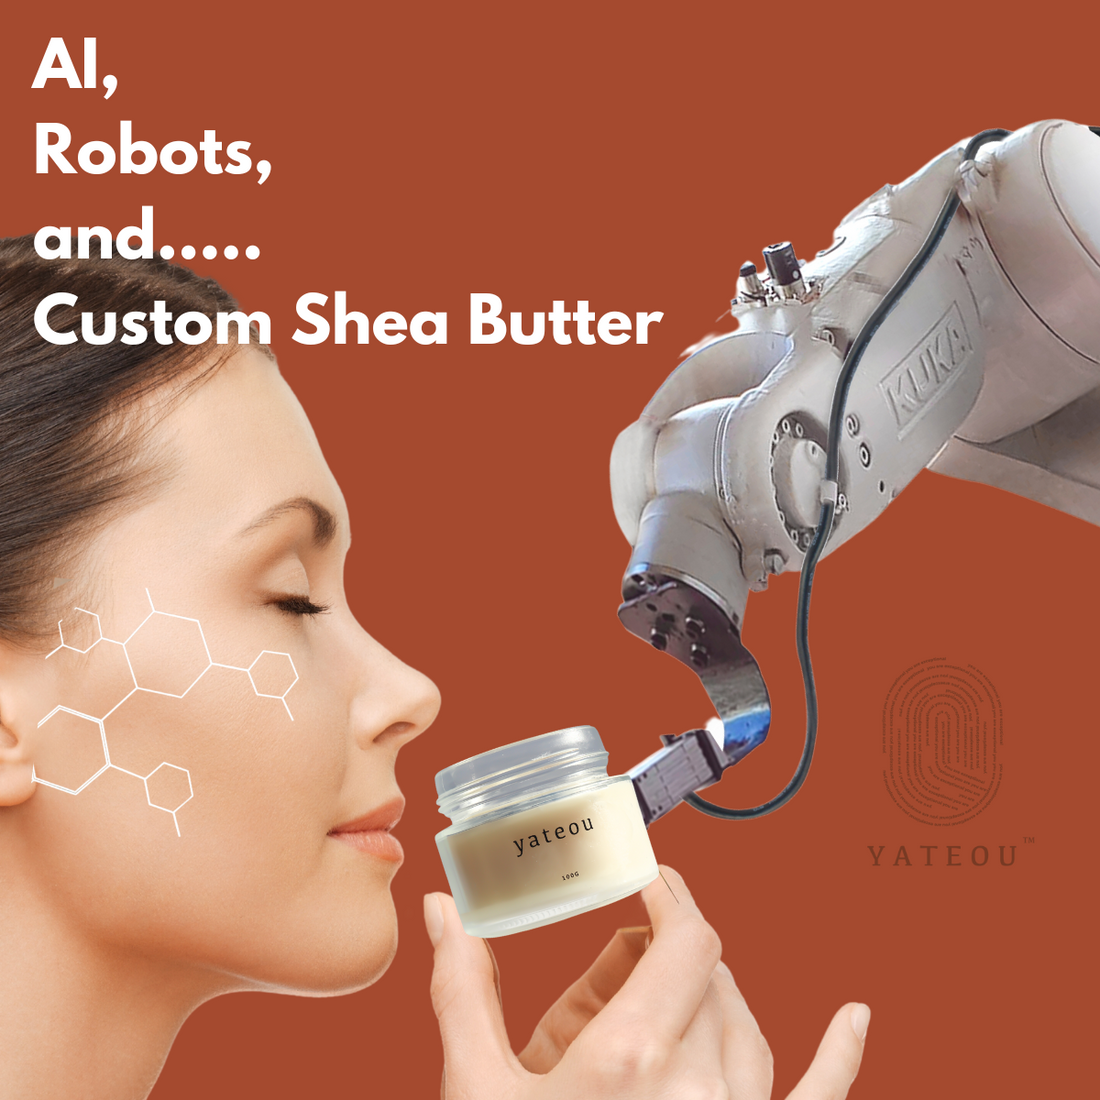 Revolutionizing Beauty: Customized Clean Beauty, AI, and Robotic Innovation